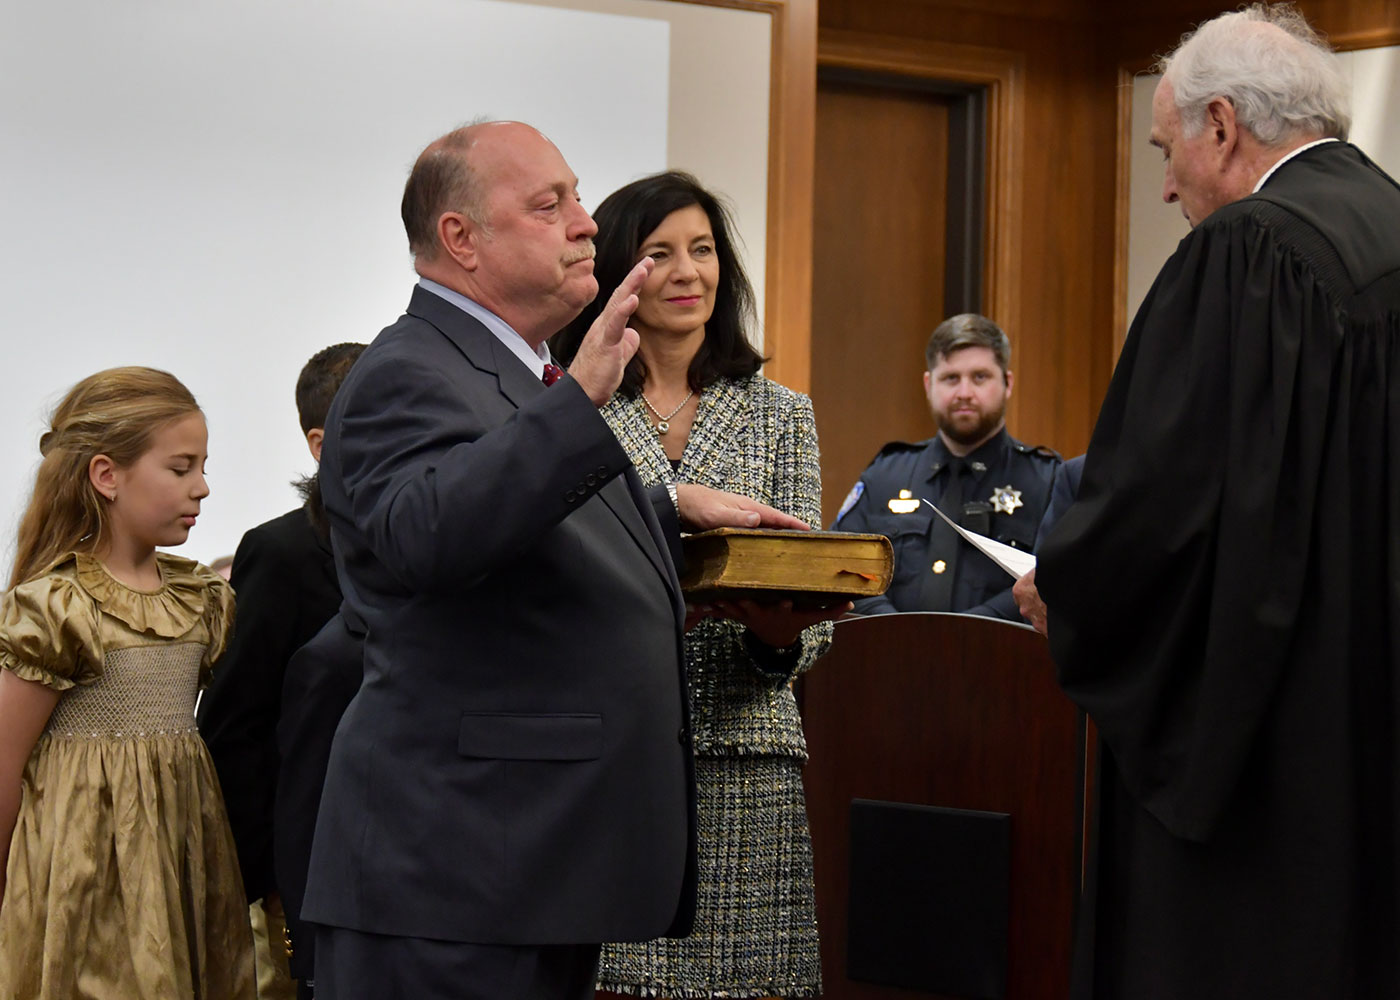 Alan Black being sworn in as District Judge (Section A) of the 22nd Judicial District, by the Honorable Martin E. Coady.